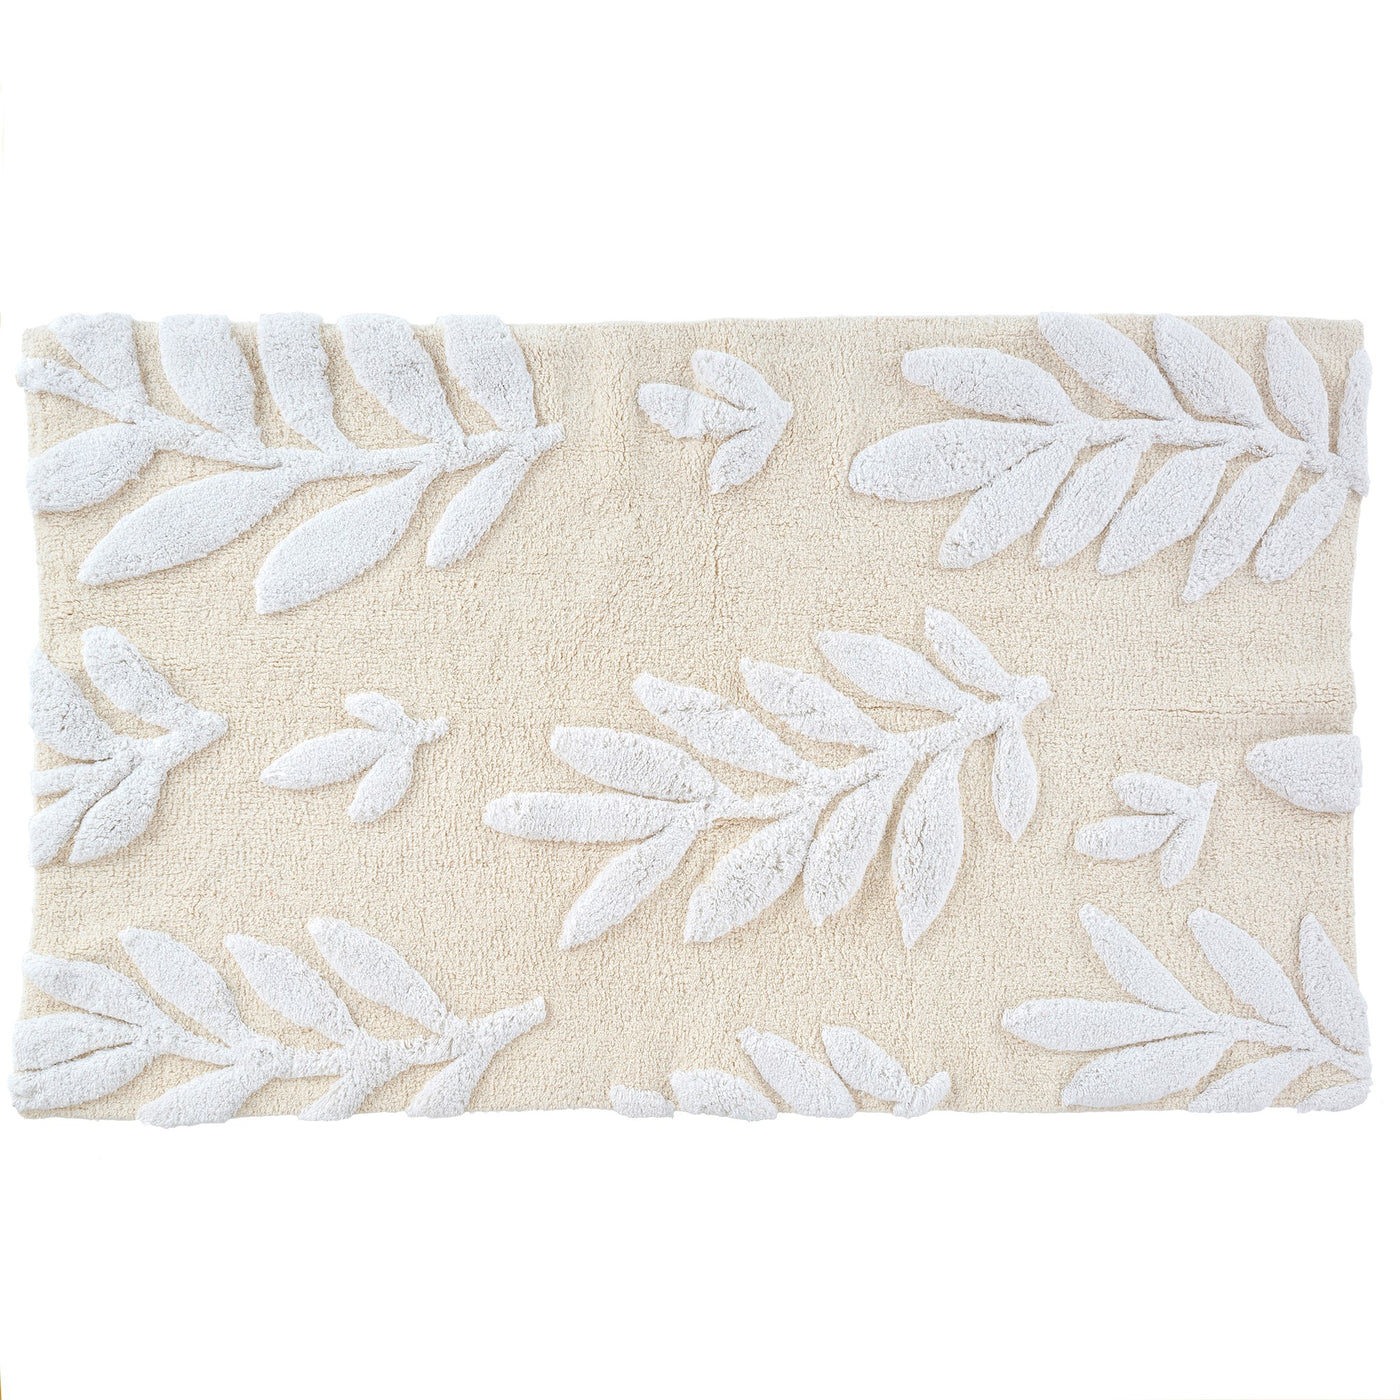 Fern Fronds Double Wide Rug - 30" x 50"